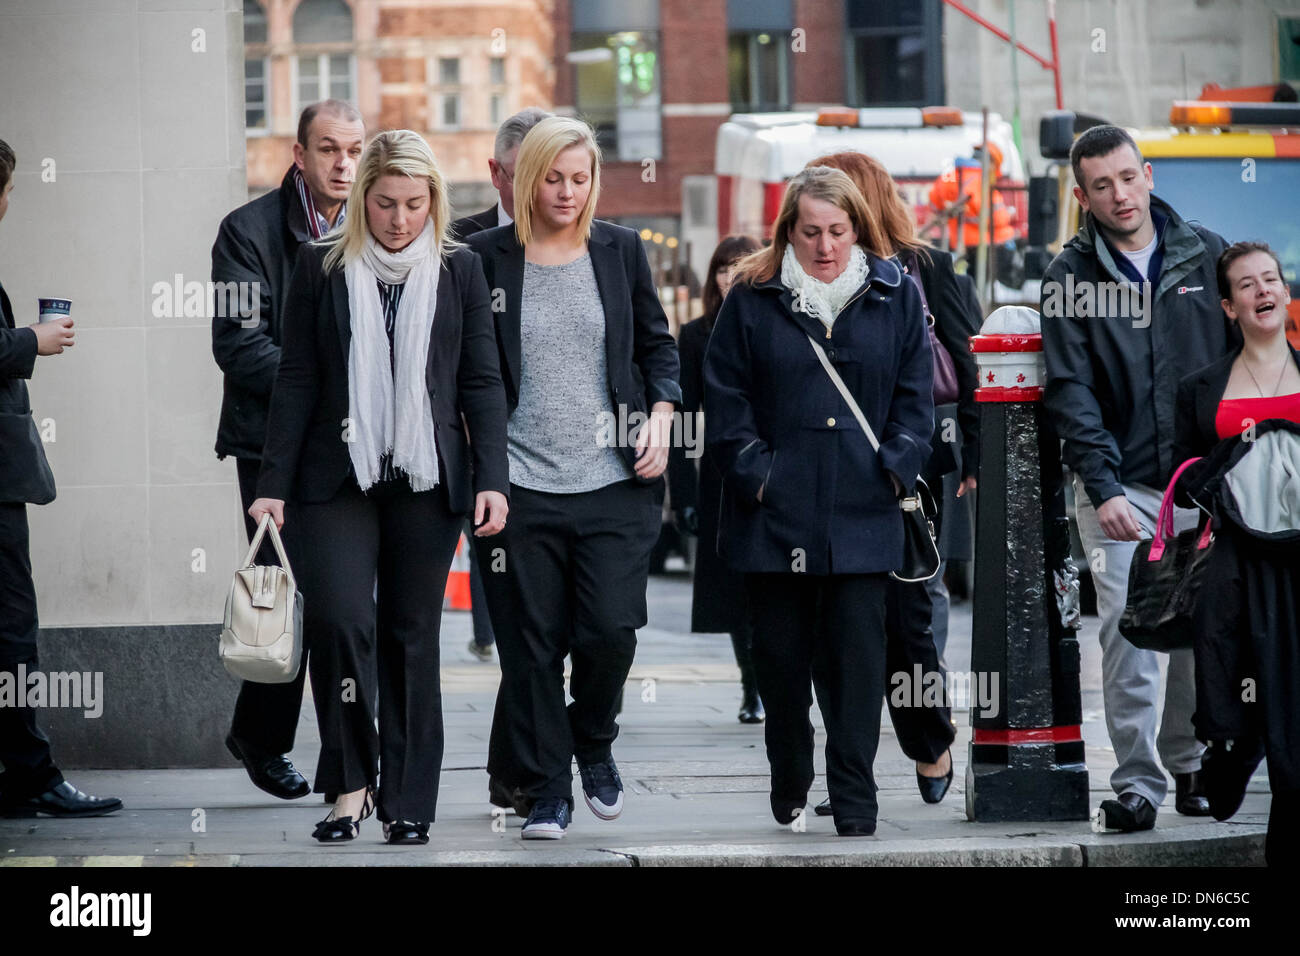 Lee Rigby Family arrive at Old Bailey court for trial verdict in London. Stock Photo